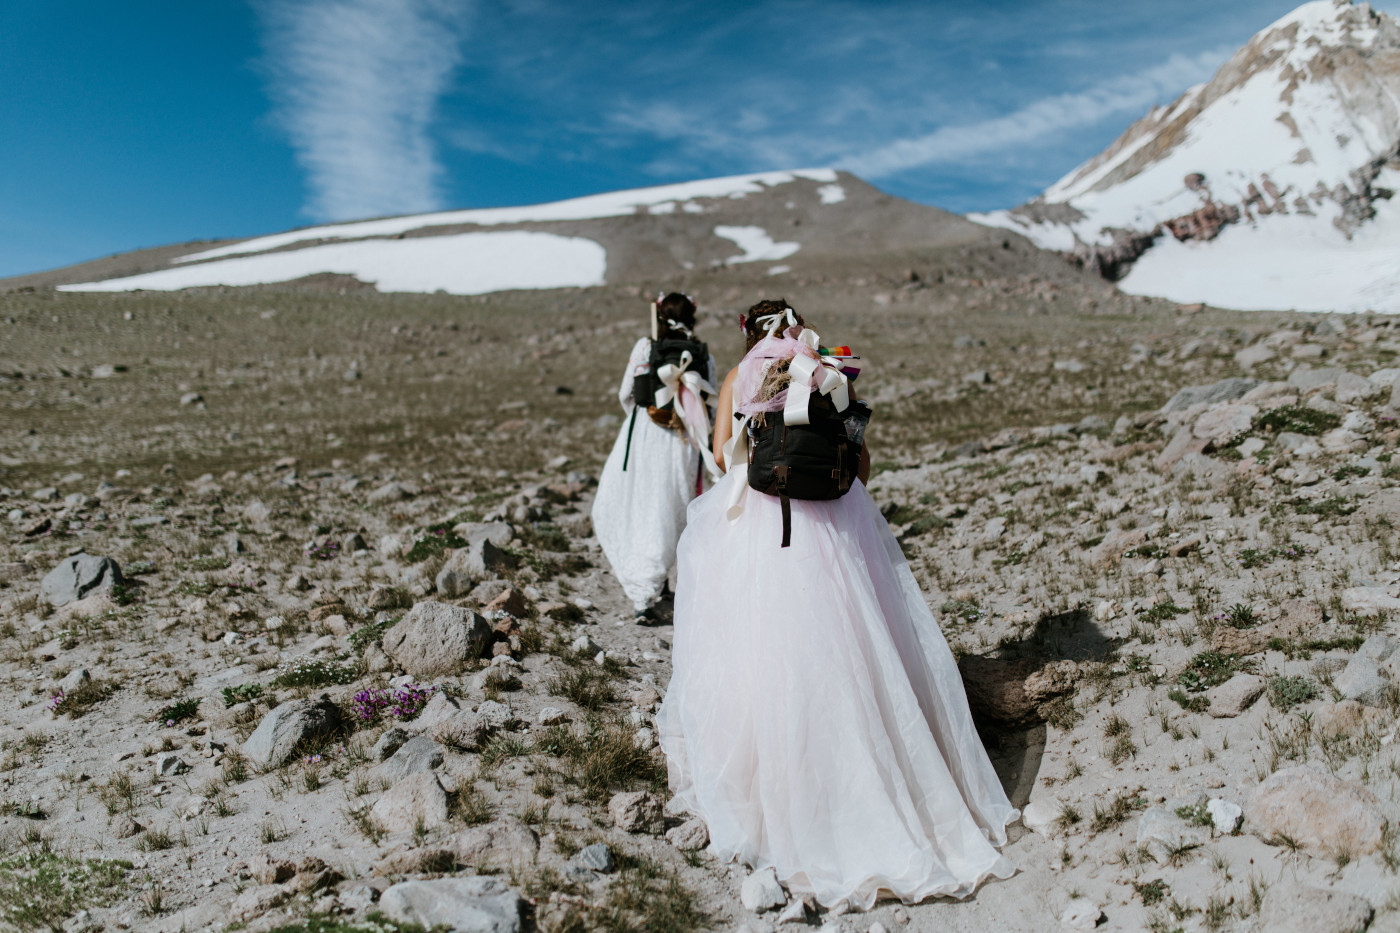 Heather and Margaux hike up the side of Mount Hood. Elopement photography at Mount Hood by Sienna Plus Josh.